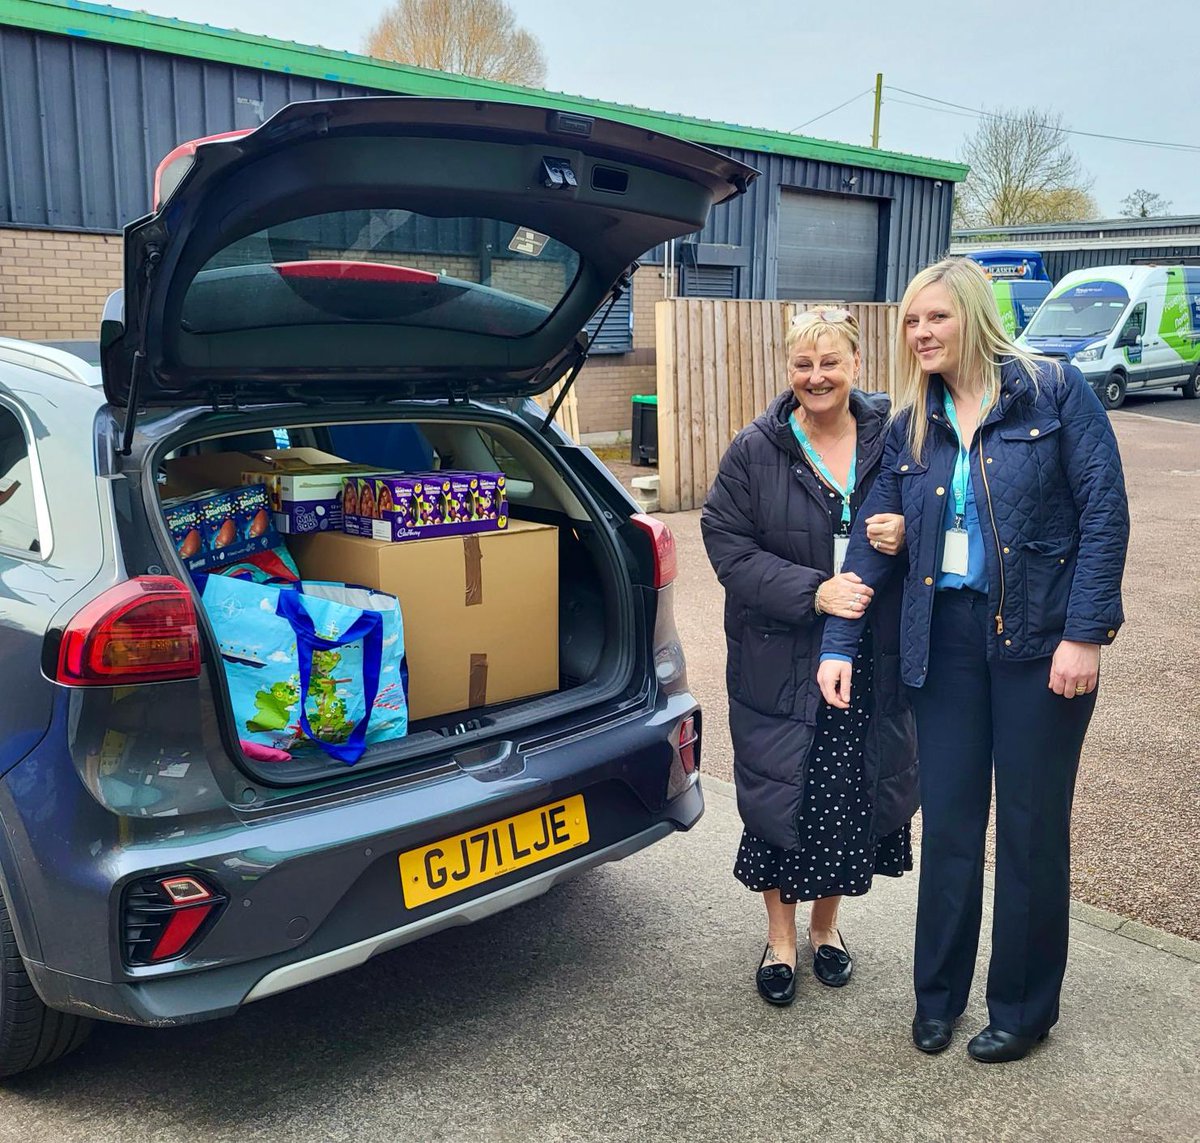 We are so grateful to @sjpwealth and so many others that have responded to our Easter egg appeal. It is amazing that we are able to give people in crisis across Salford an extra treat with your help. Thank you! #salford #endhunger #emergencyfood